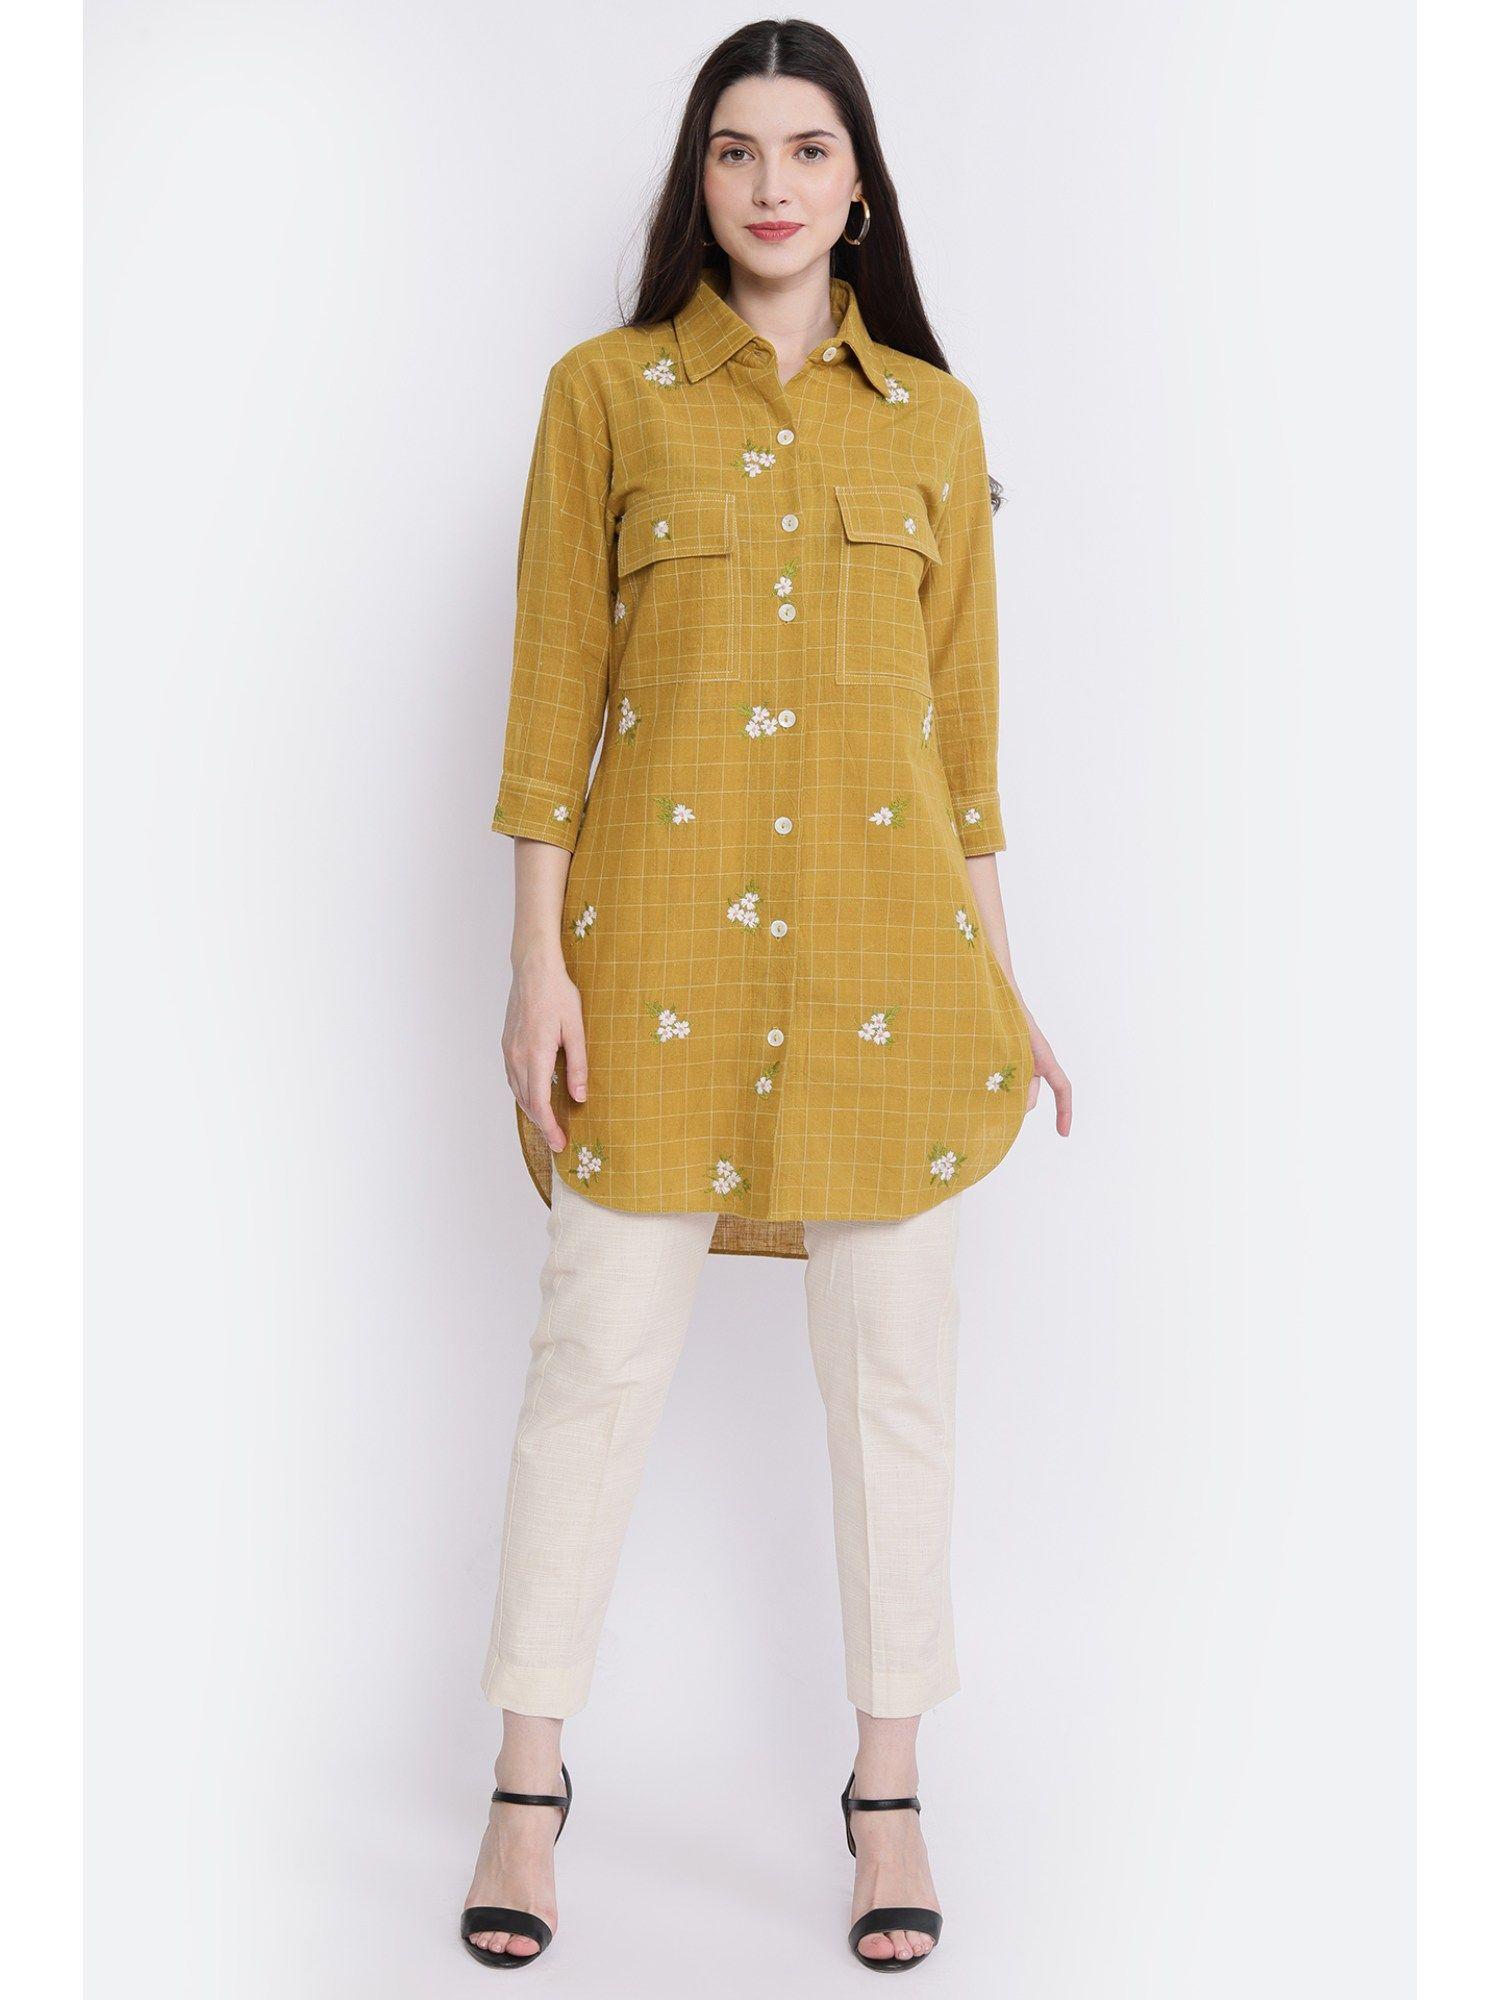 haafiza shirt with floral embroidery